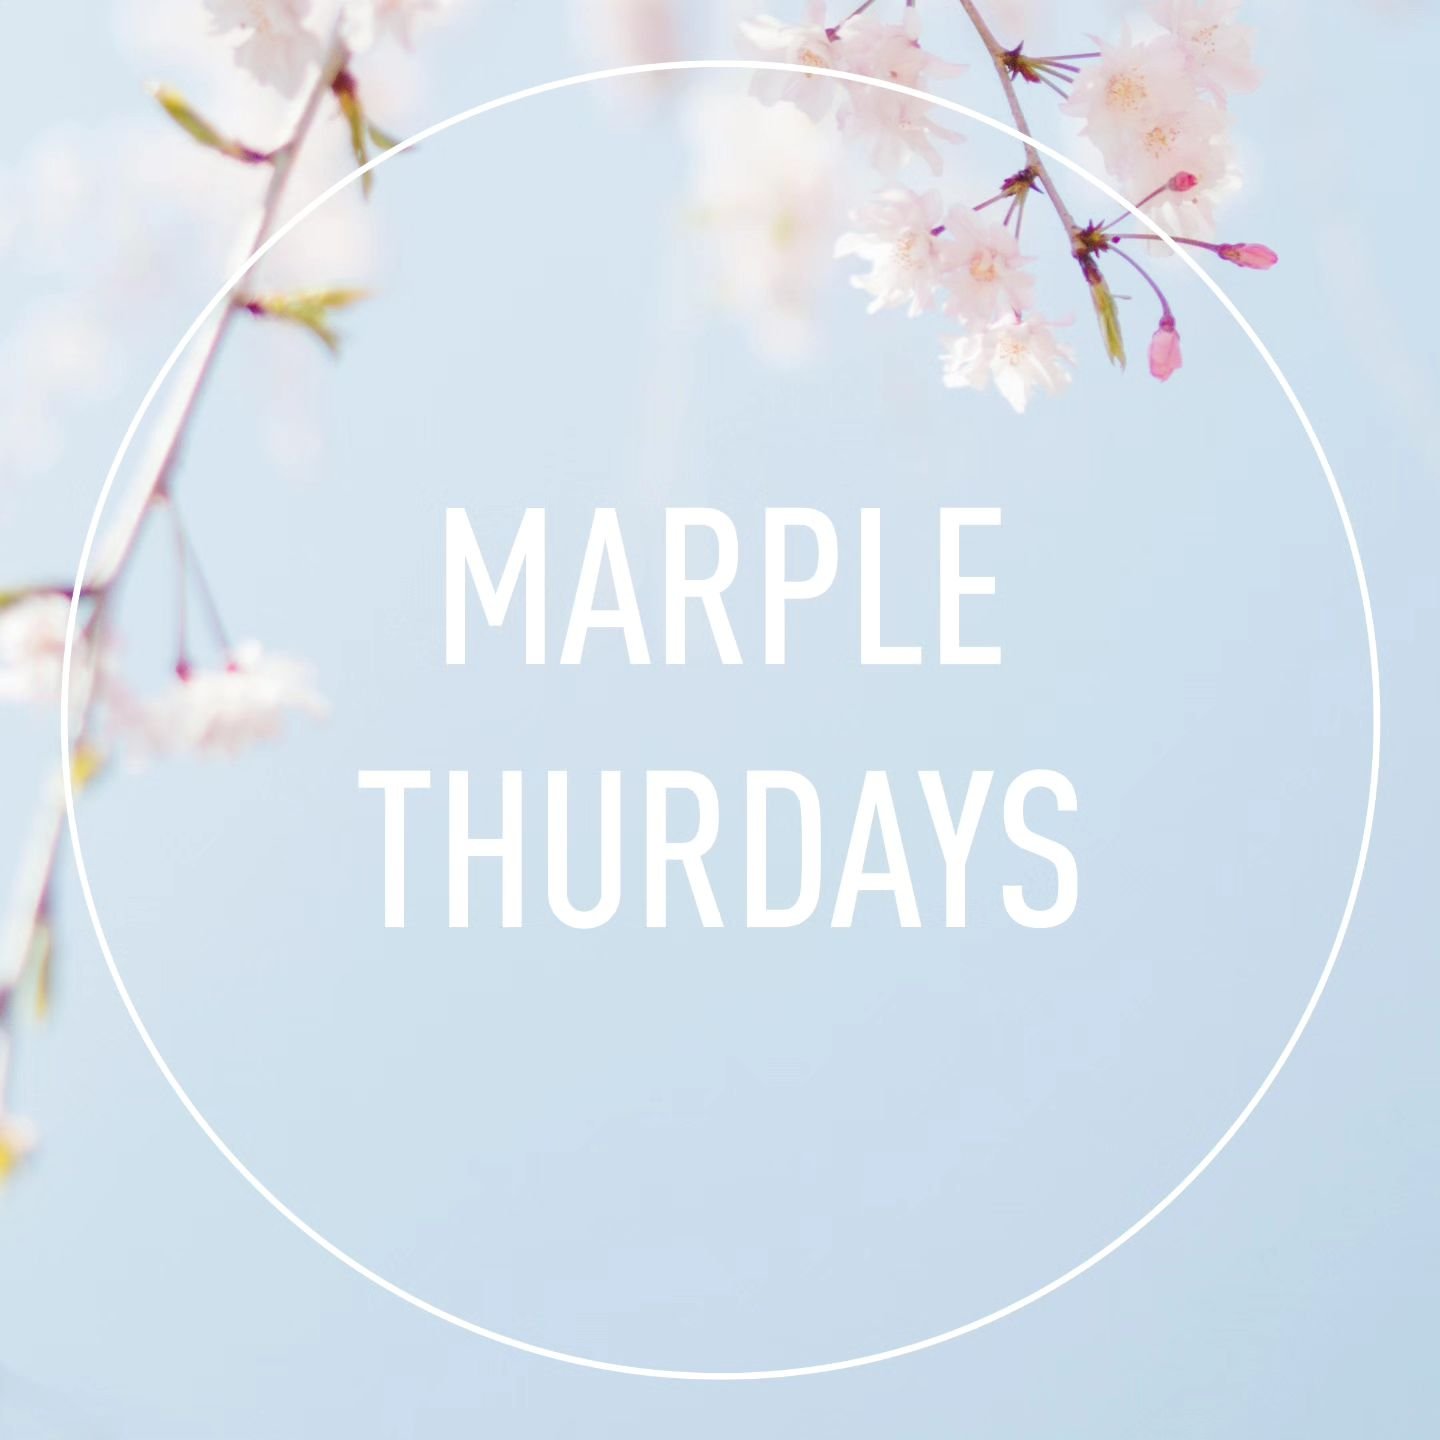 Morning all, hope you're enjoying Spring!

Just a minor update to our hours on Thursdays at the Marple shop, we'll be open 10am until 6pm from now on. 

We know that many of you are appreciating the later hours, but we're finding that between 6 &amp;